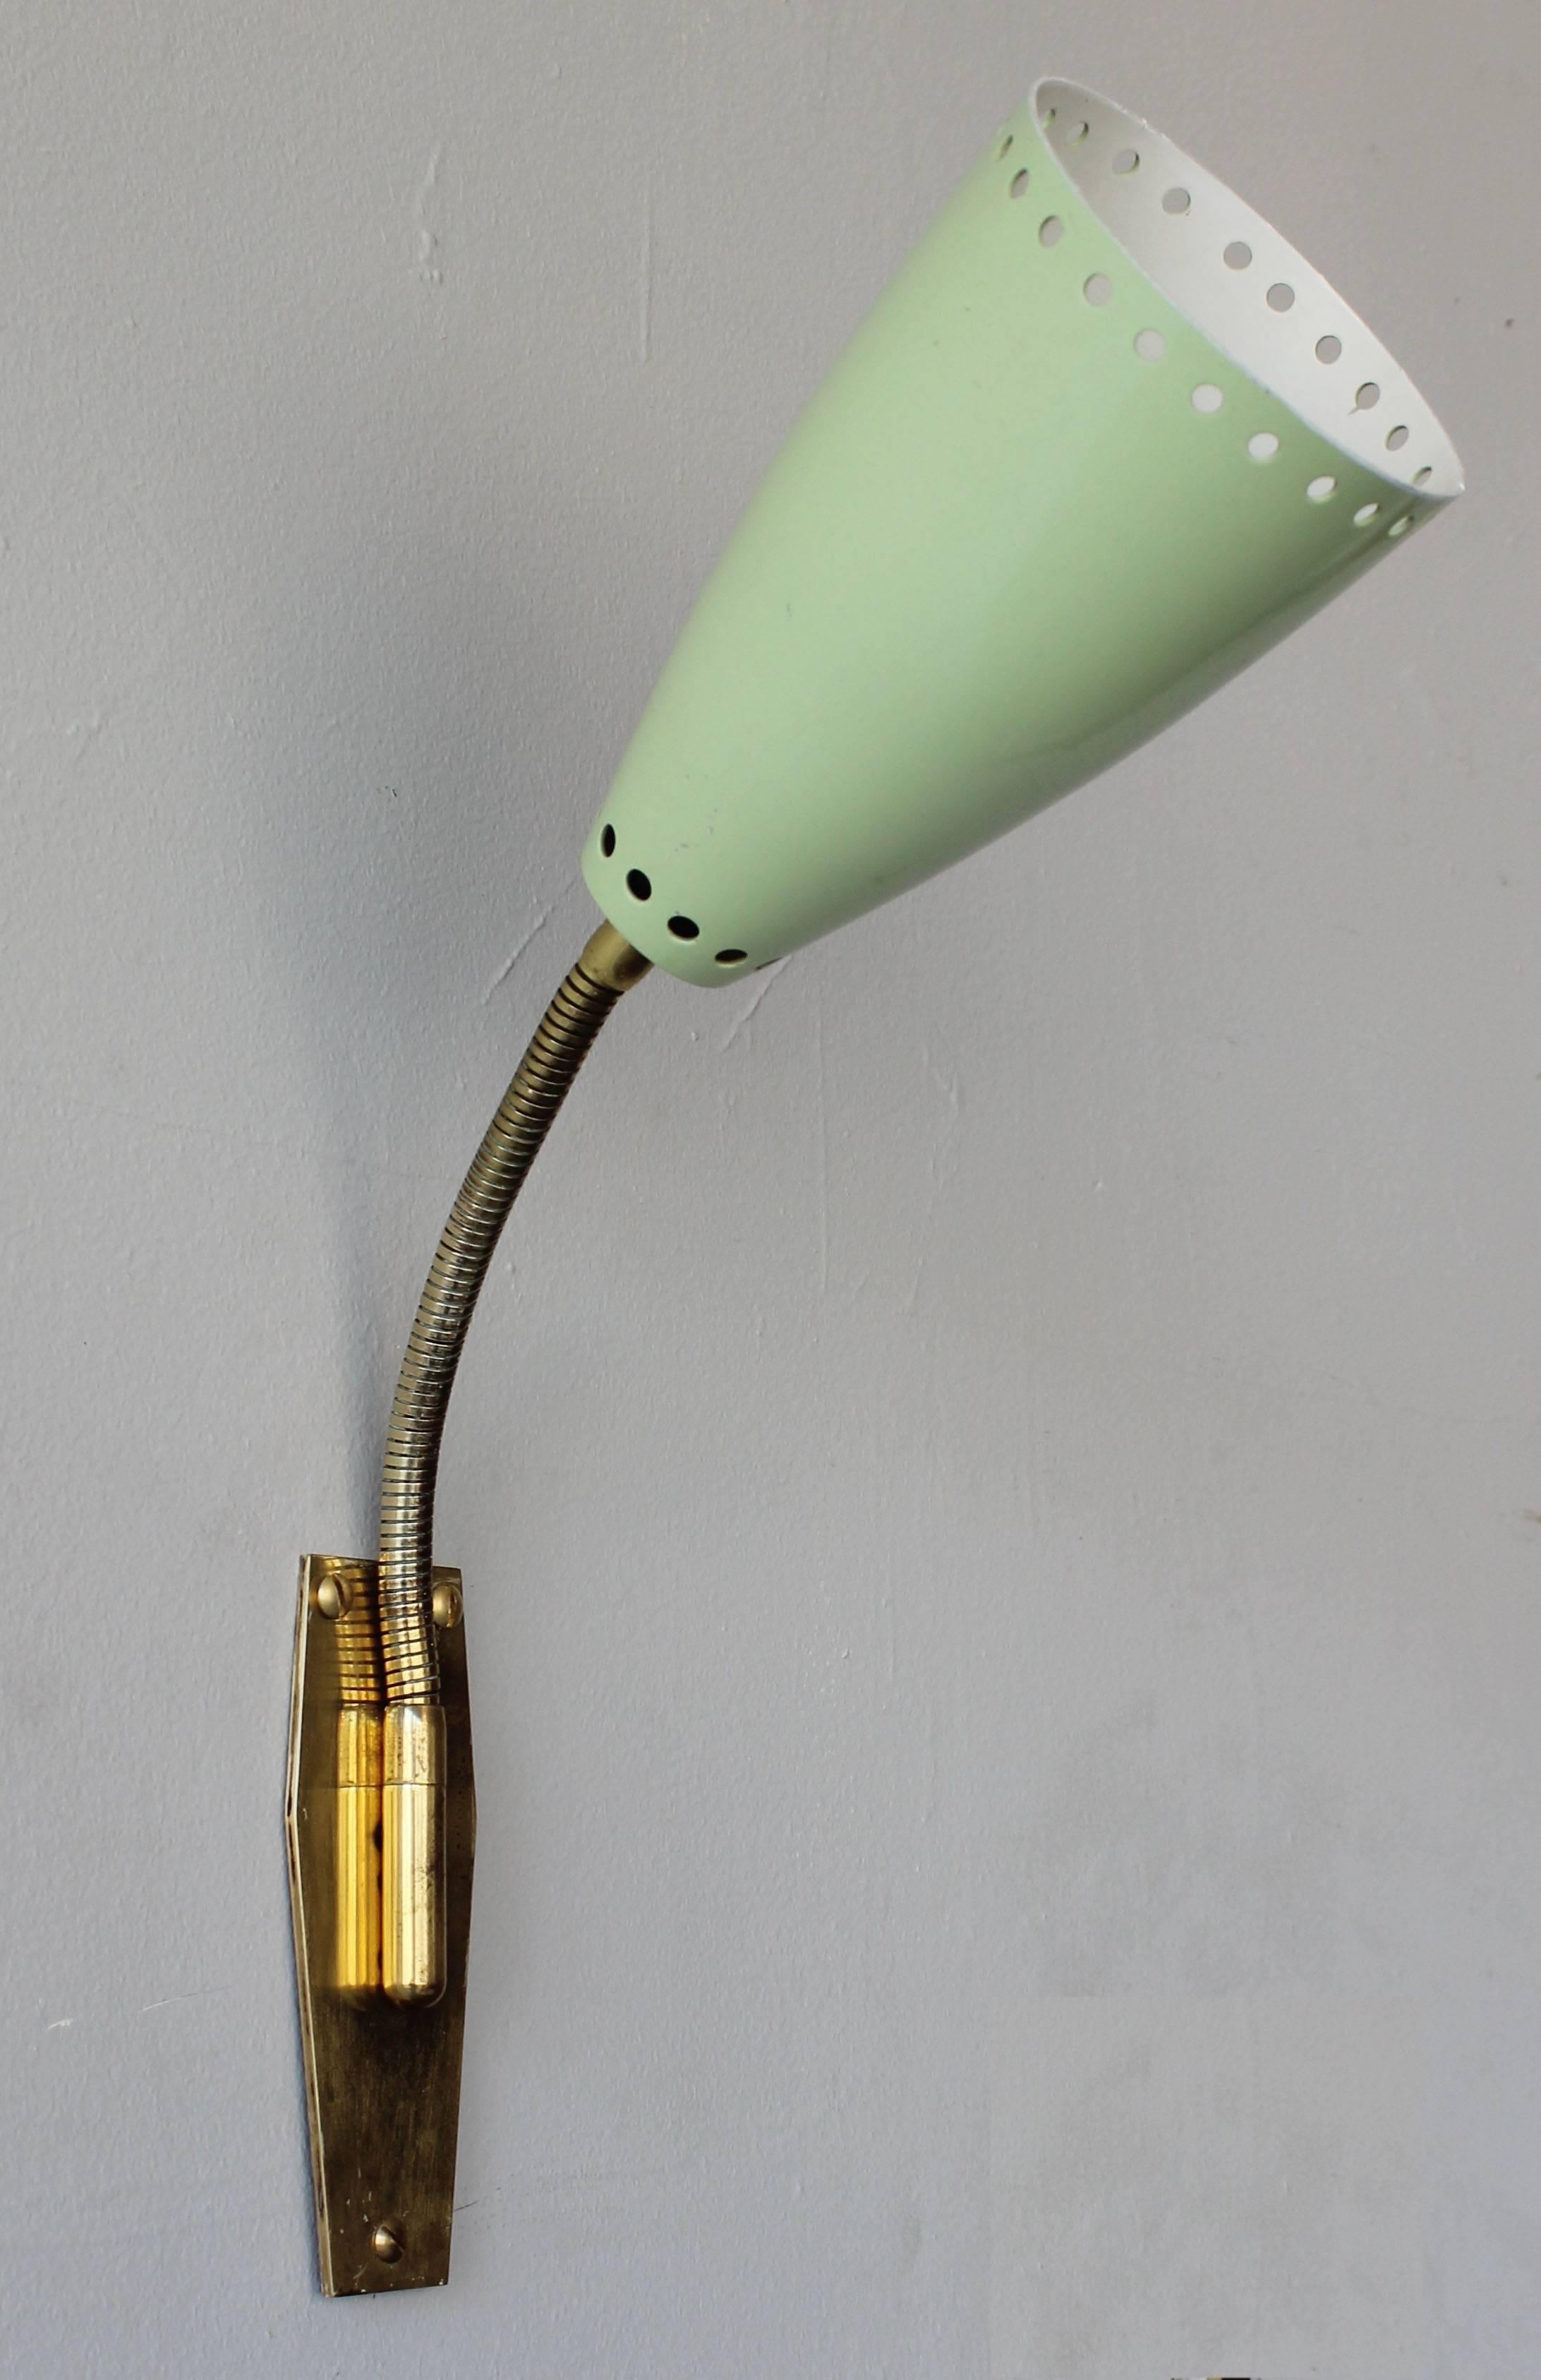 A pair of Italian enameled metal and brass adjustable gooseneck sconces. Two pairs and one single available.

Depth = 11 inches when adjusted to right angle.